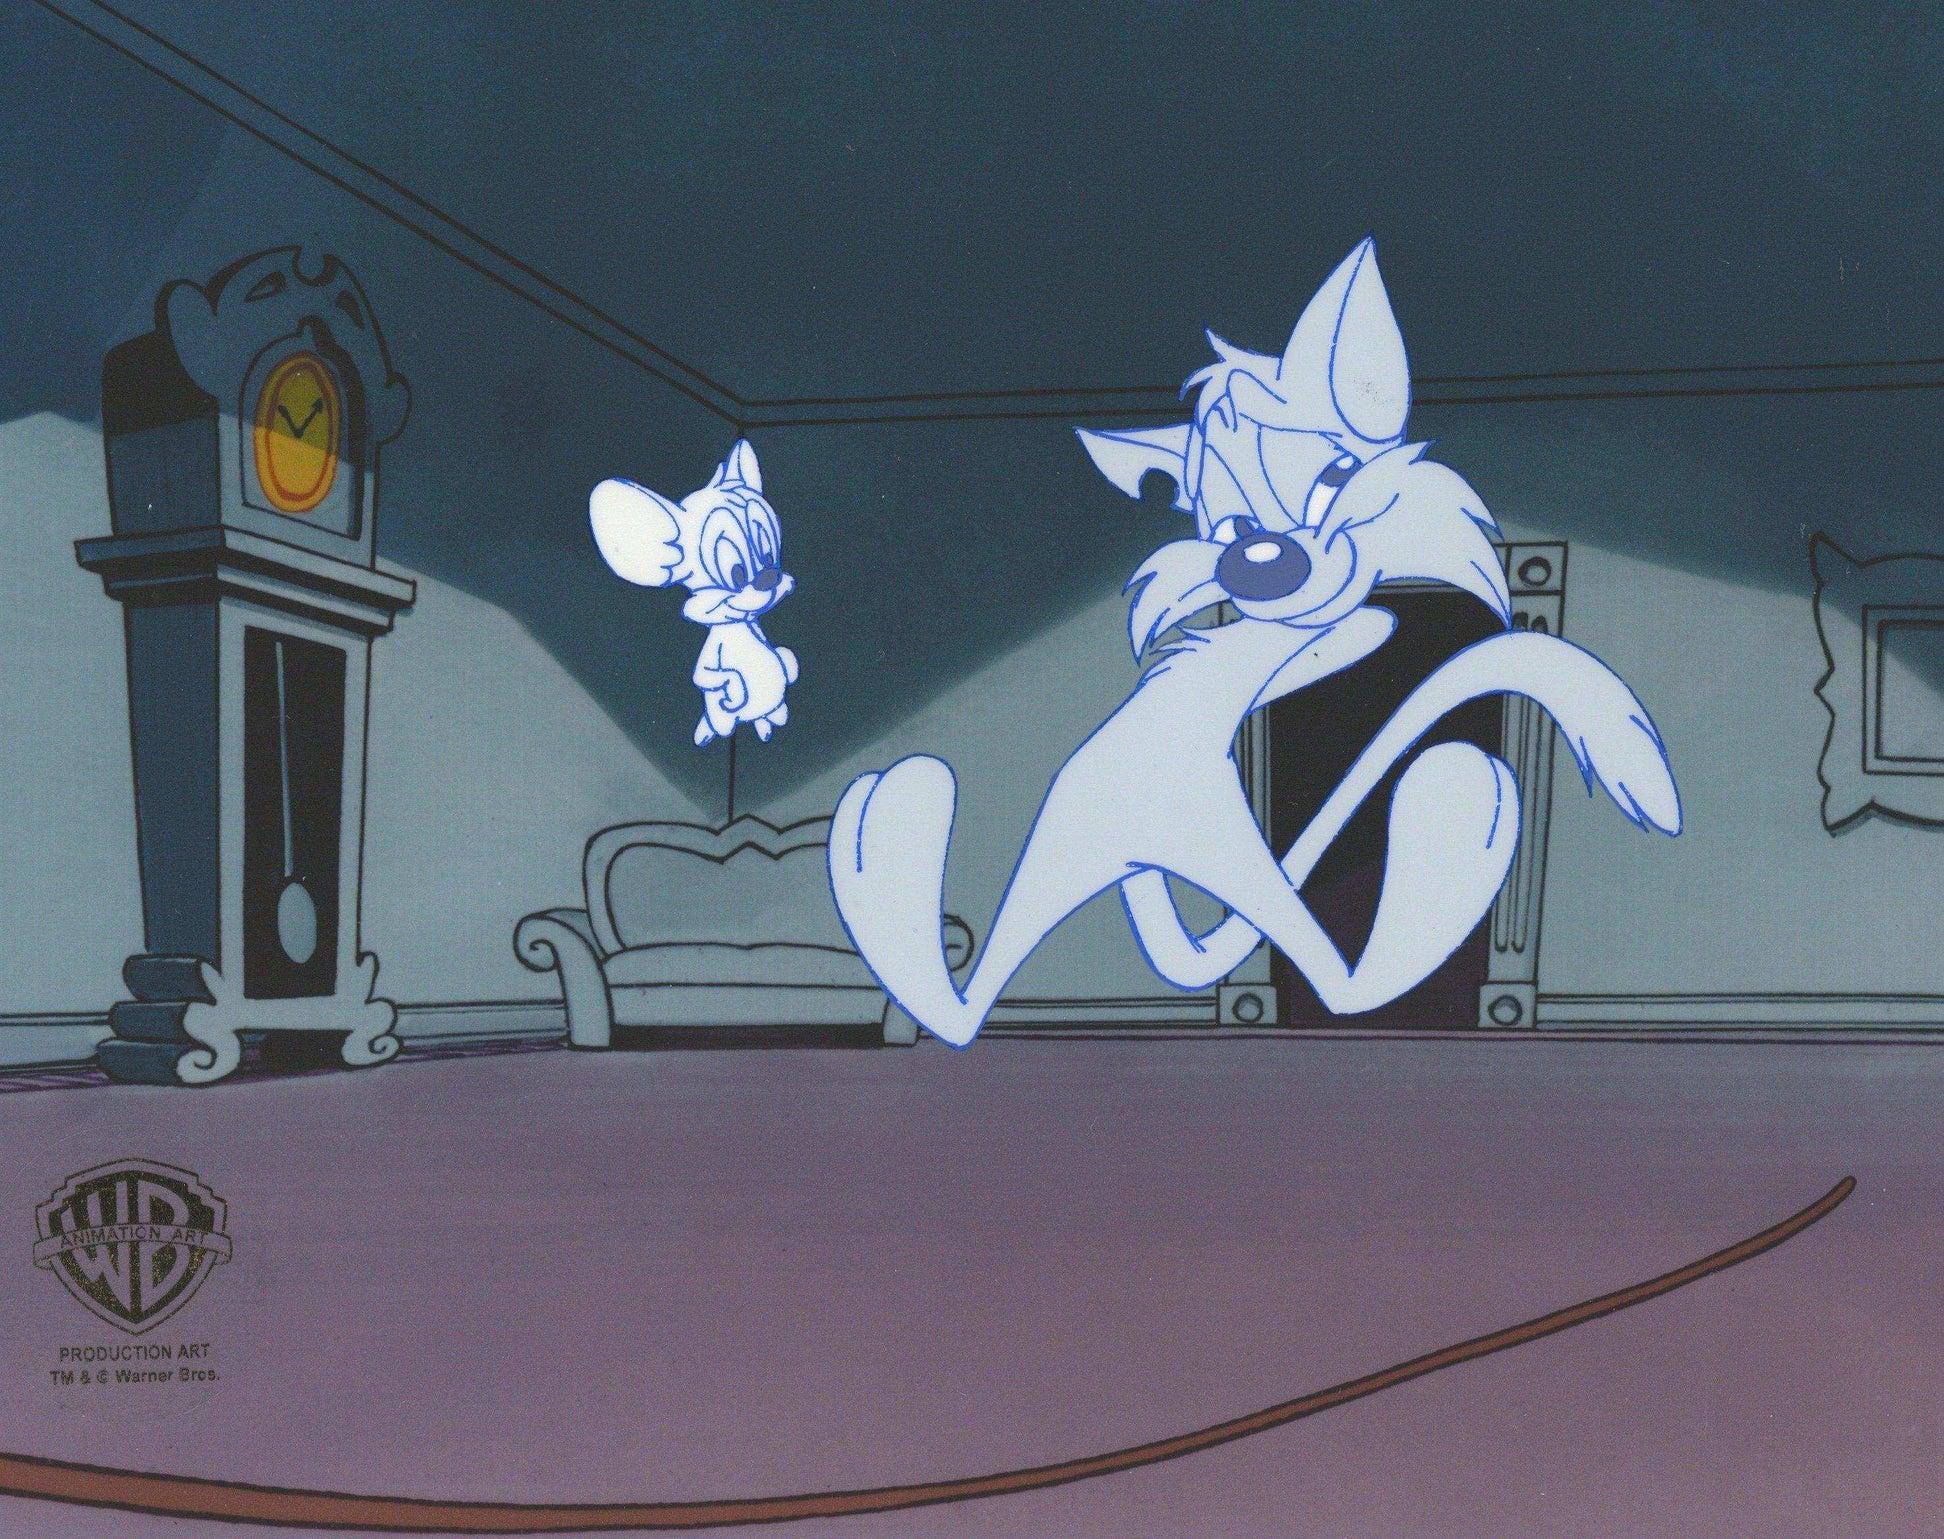 Tiny Toons Original Production Cel with Matching Drawing: Furball and Sneezer - Art by Warner Bros. Studio Artists